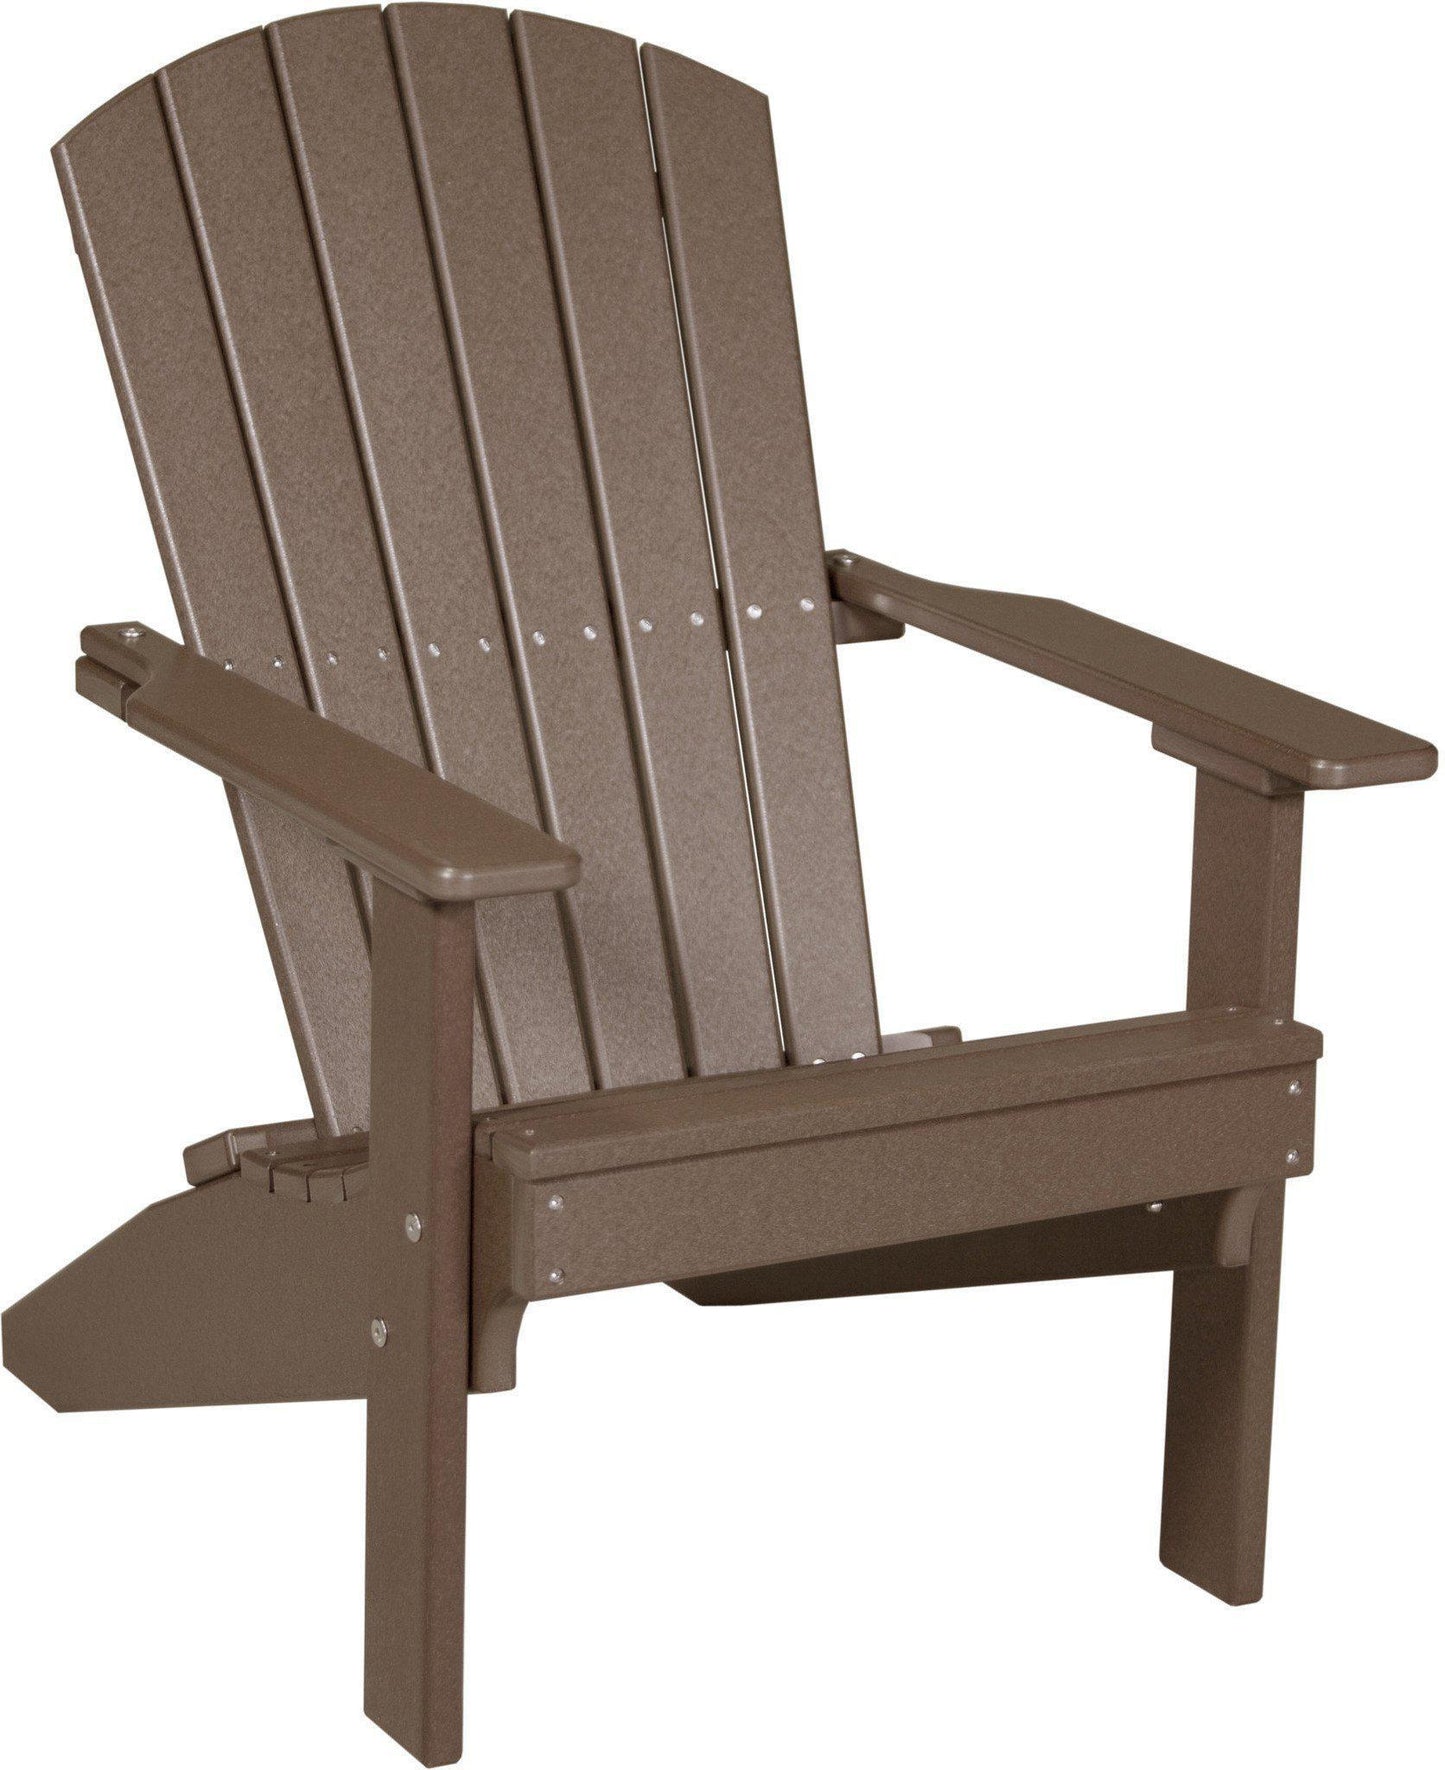 LuxCraft Recycled Plastic Lakeside Adirondack Chair - Rocking Furniture